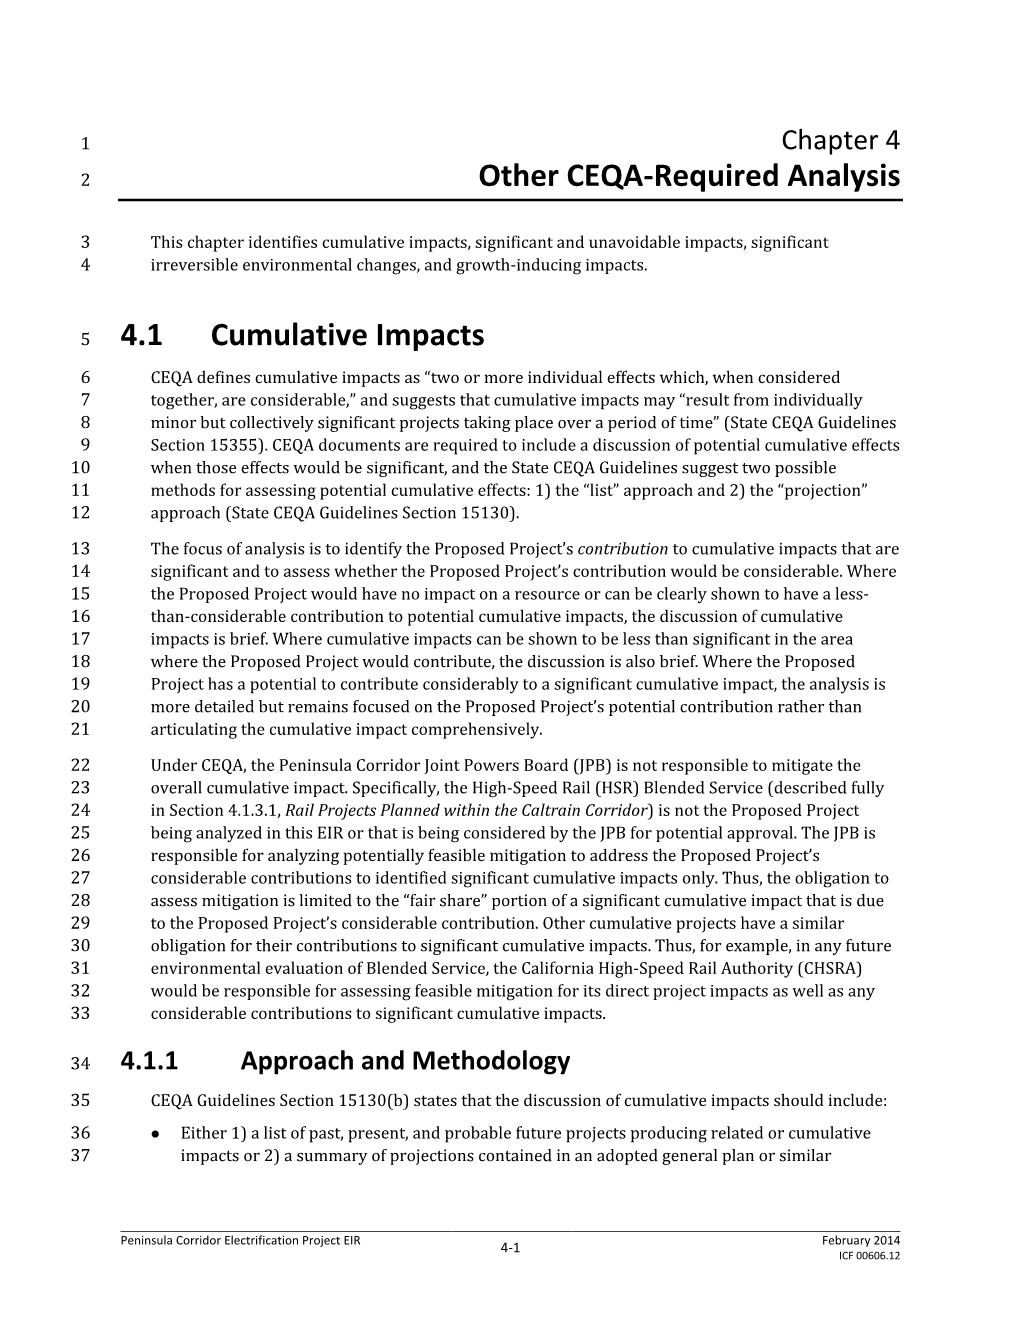 Other CEQA-Required Analysis